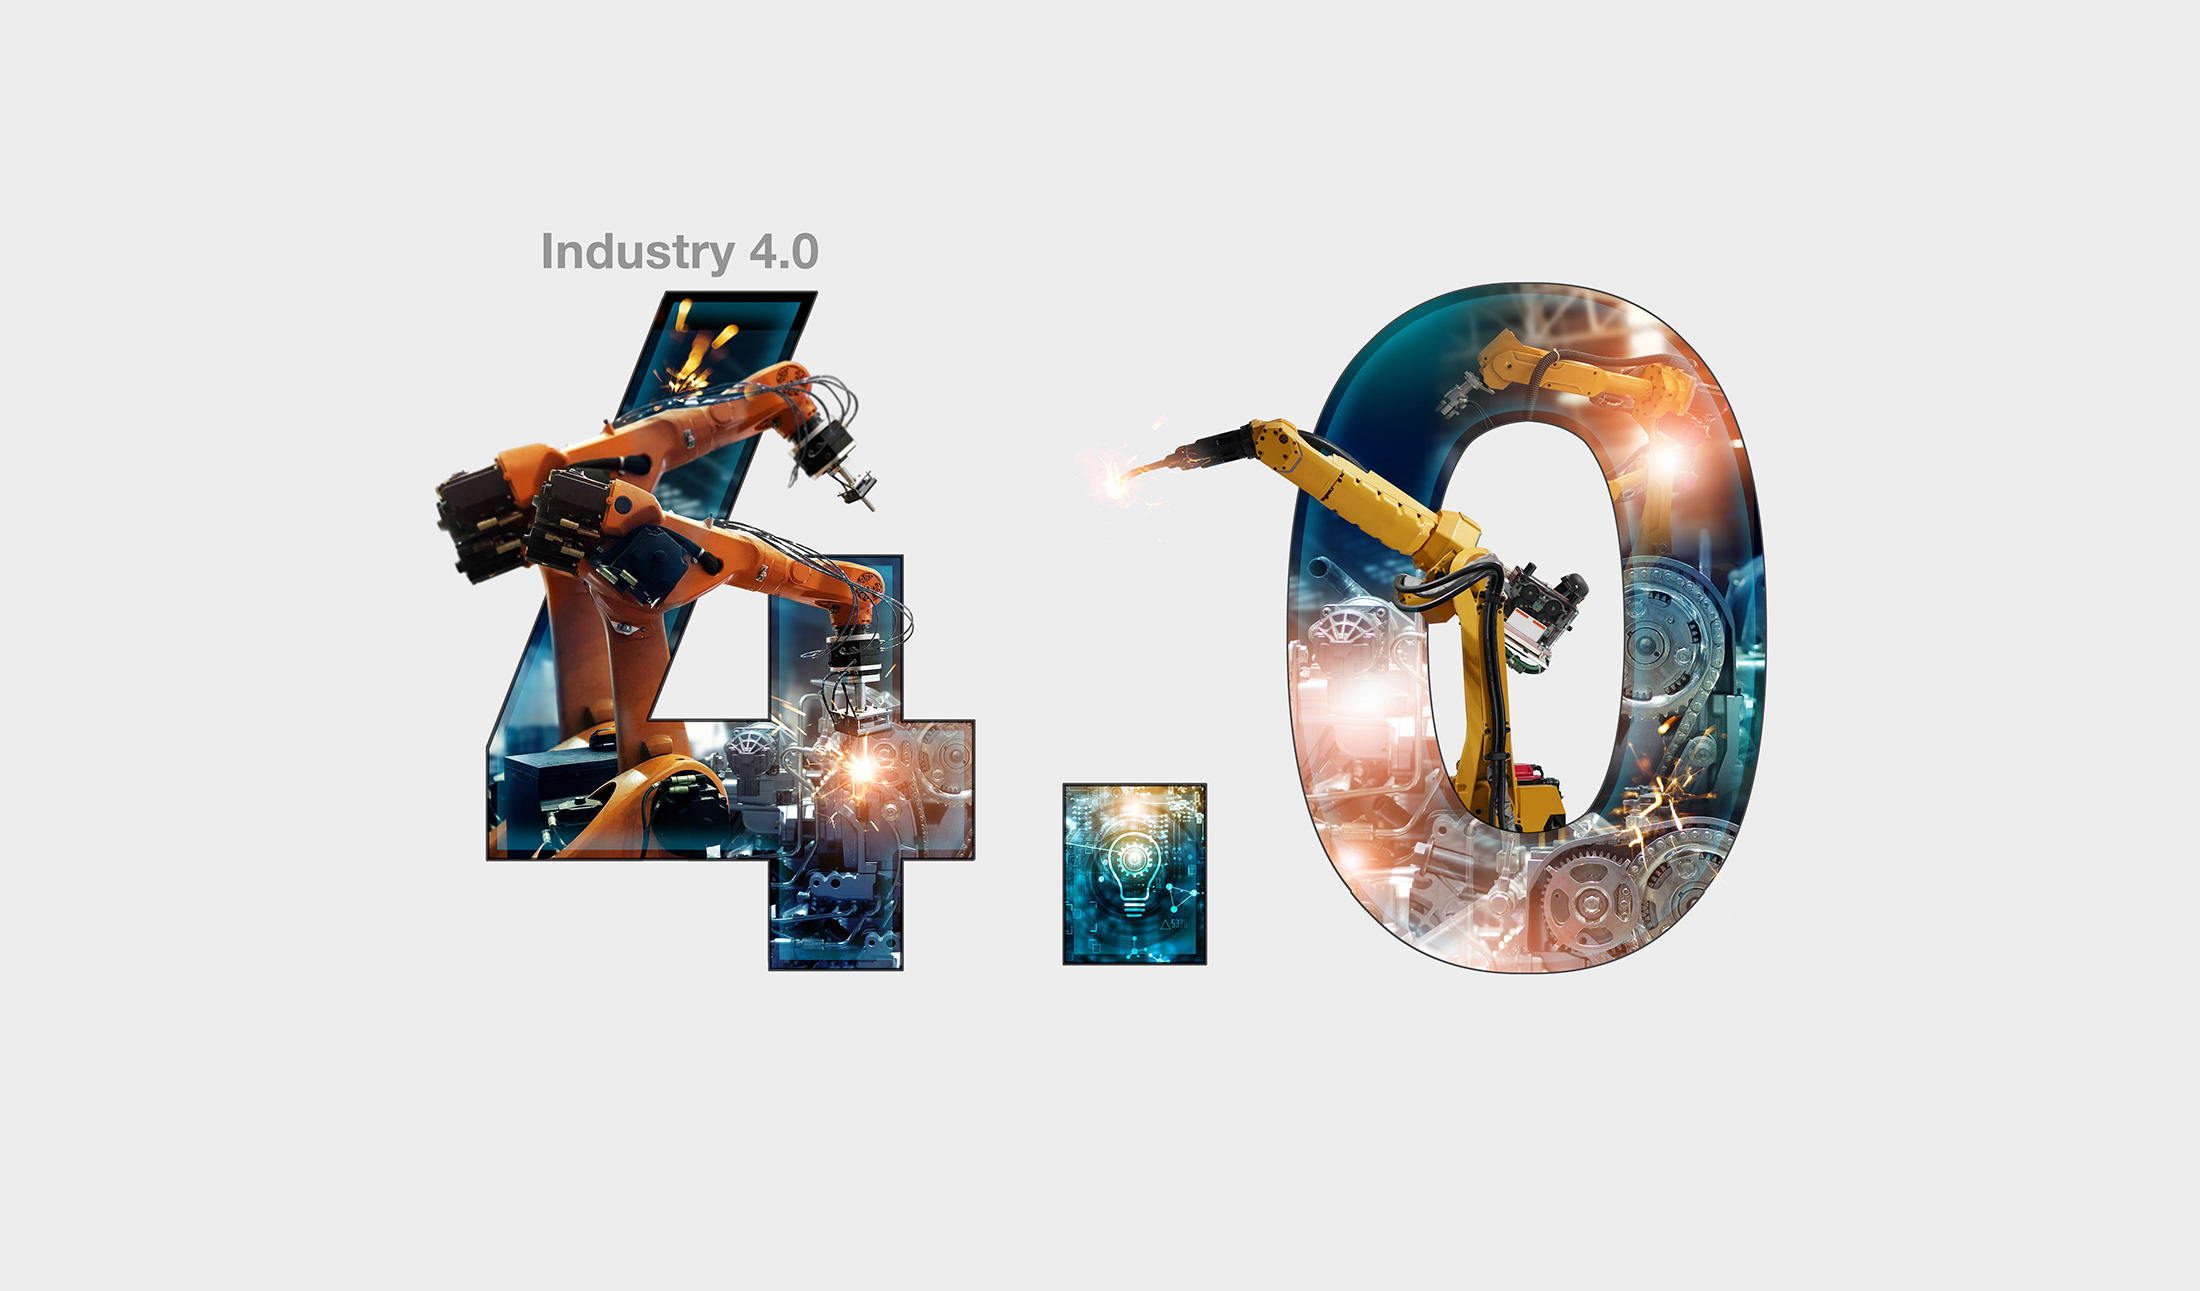 Industry,4.0,Concept,,Iot,,Automation,Robot,Arms,Machine,And,Monitoring